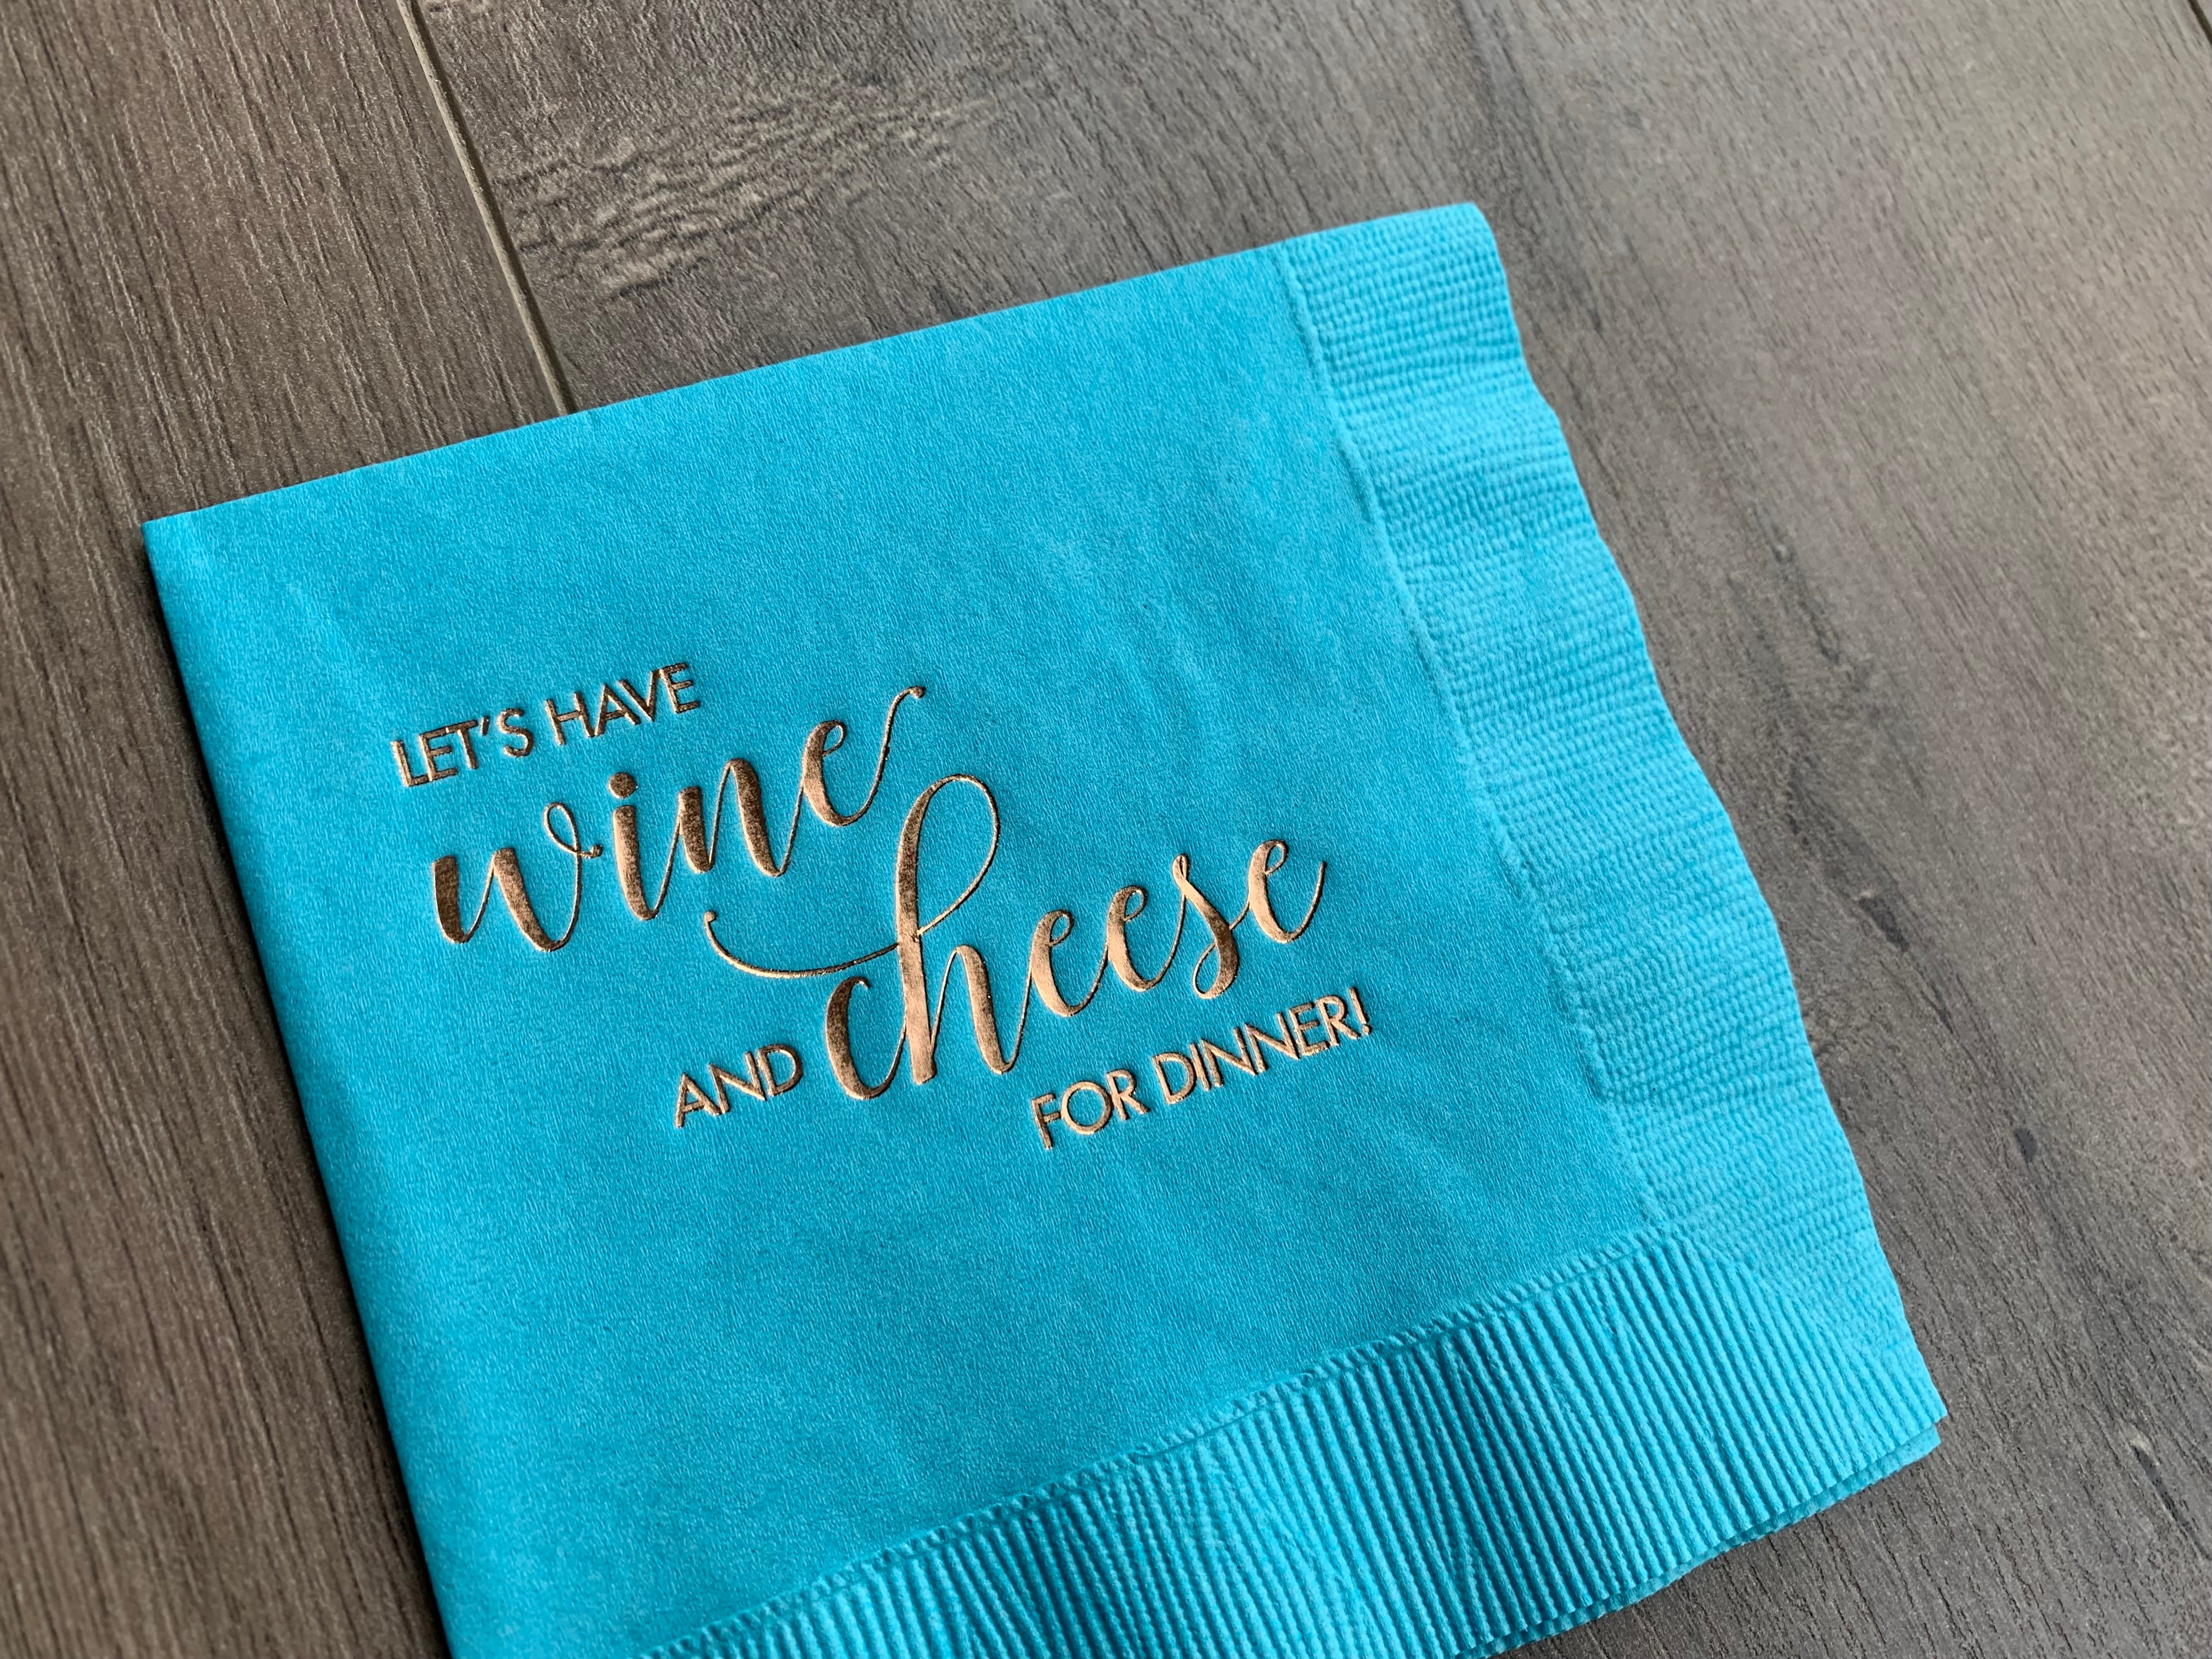 Angled closeup of a bright blue napkin with metallic gold foil that reads - Let's have wine and cheese for dinner! The napkin is slanted and slightly cut off in the frame, as it lies on a grayish wooden background.